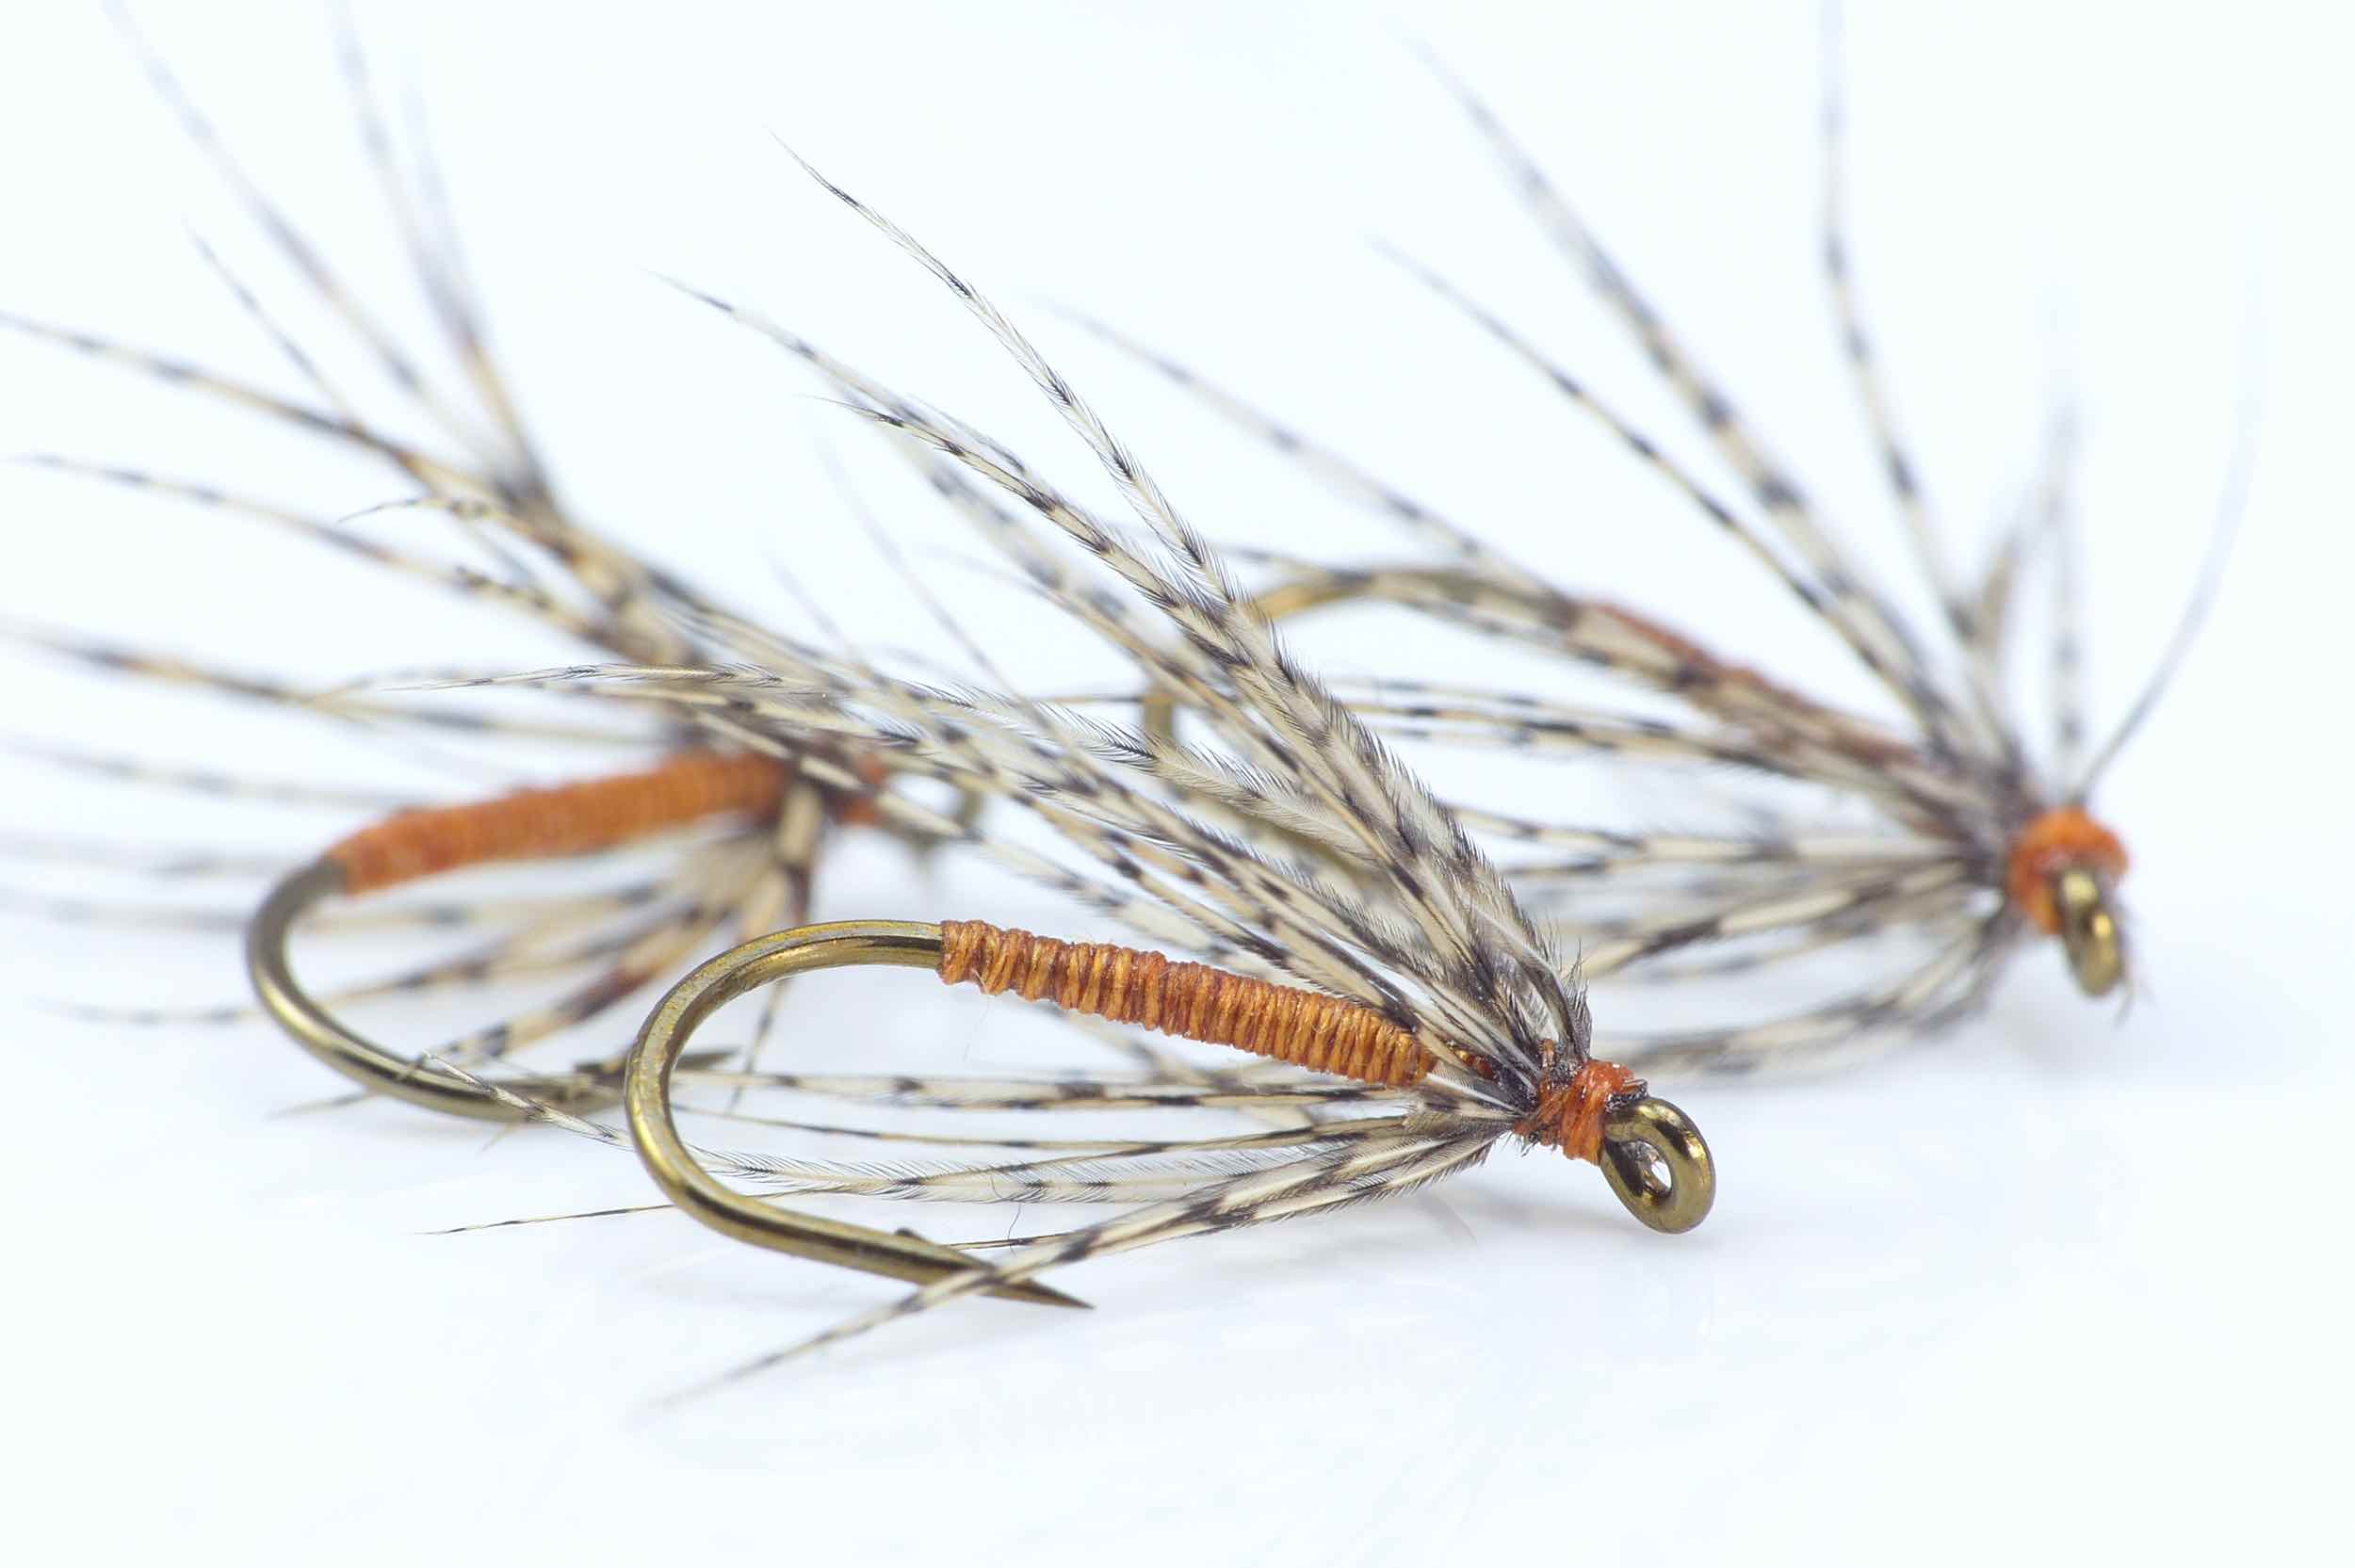 North Country Spiders - Wet Flies - Soft Hackles